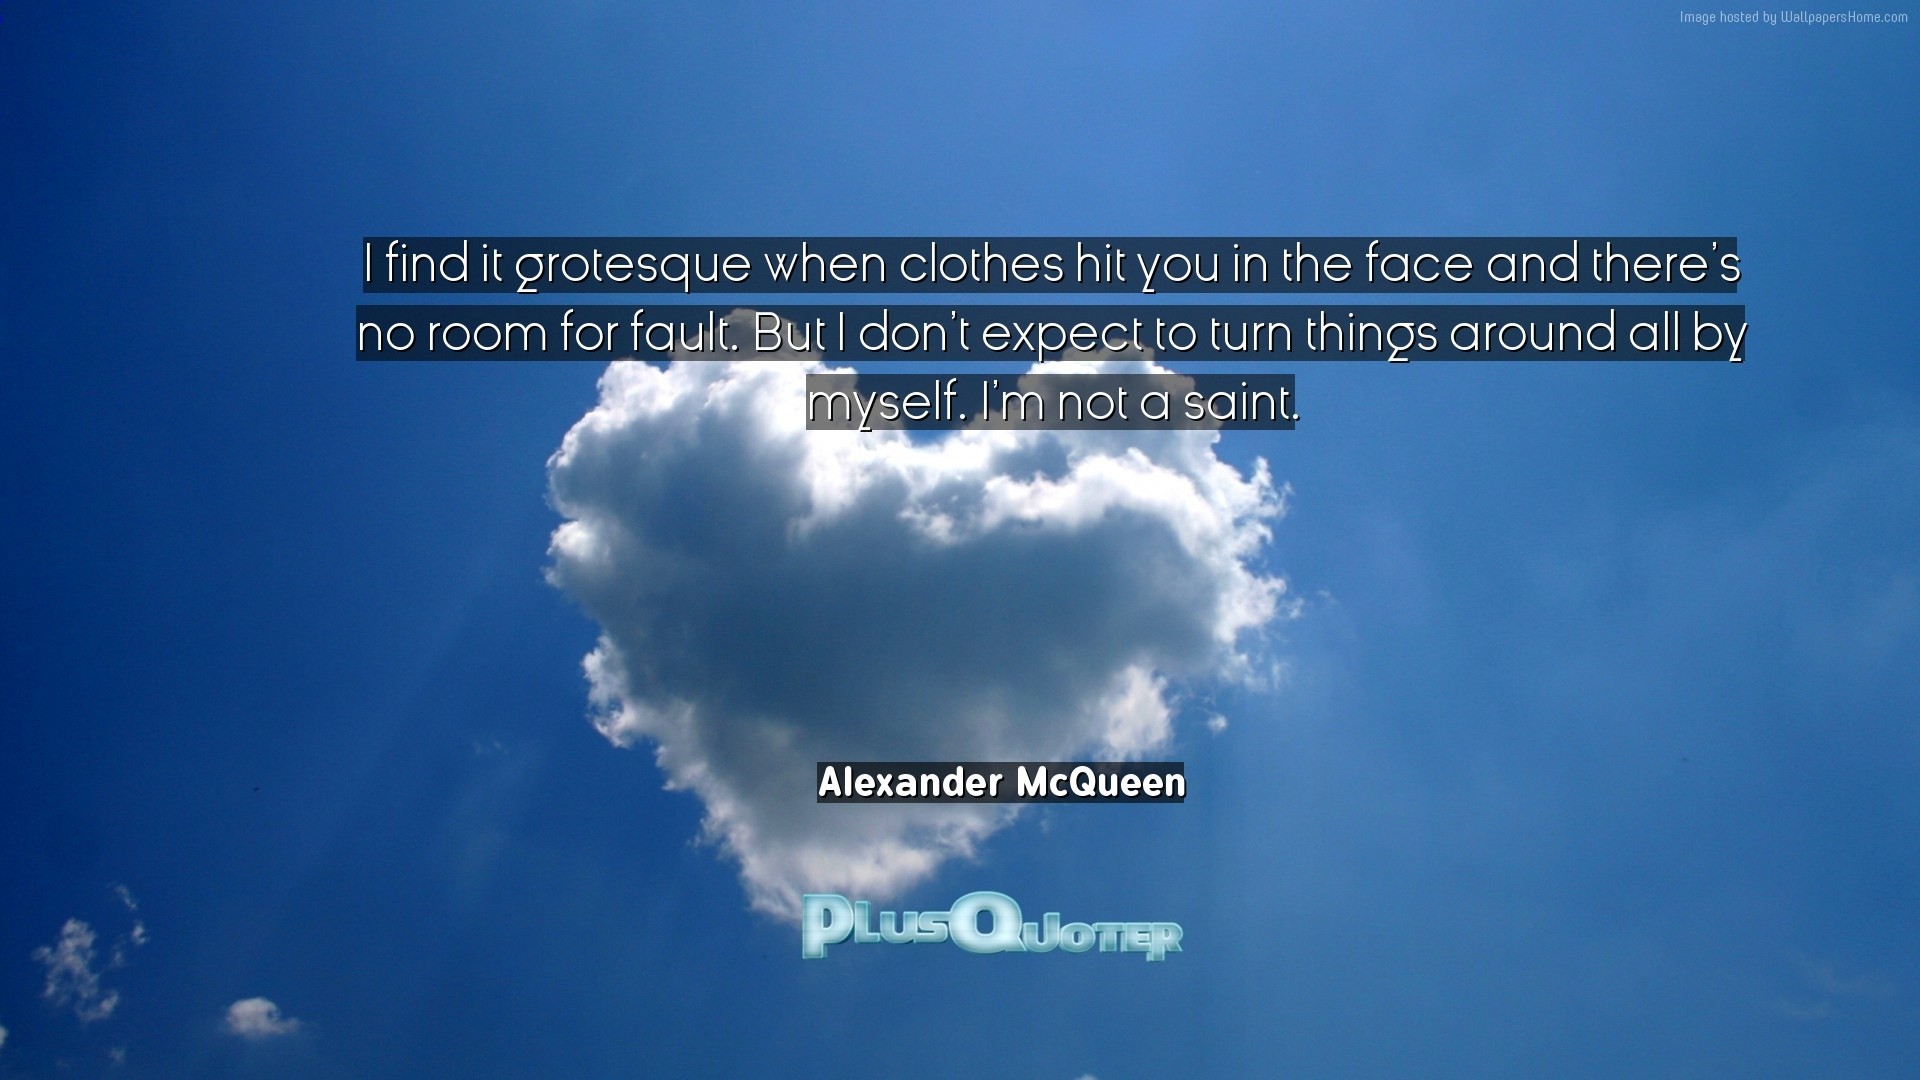 1920x1080 Download Wallpaper with inspirational Quotes- "I find it grotesque when  clothes hit you in